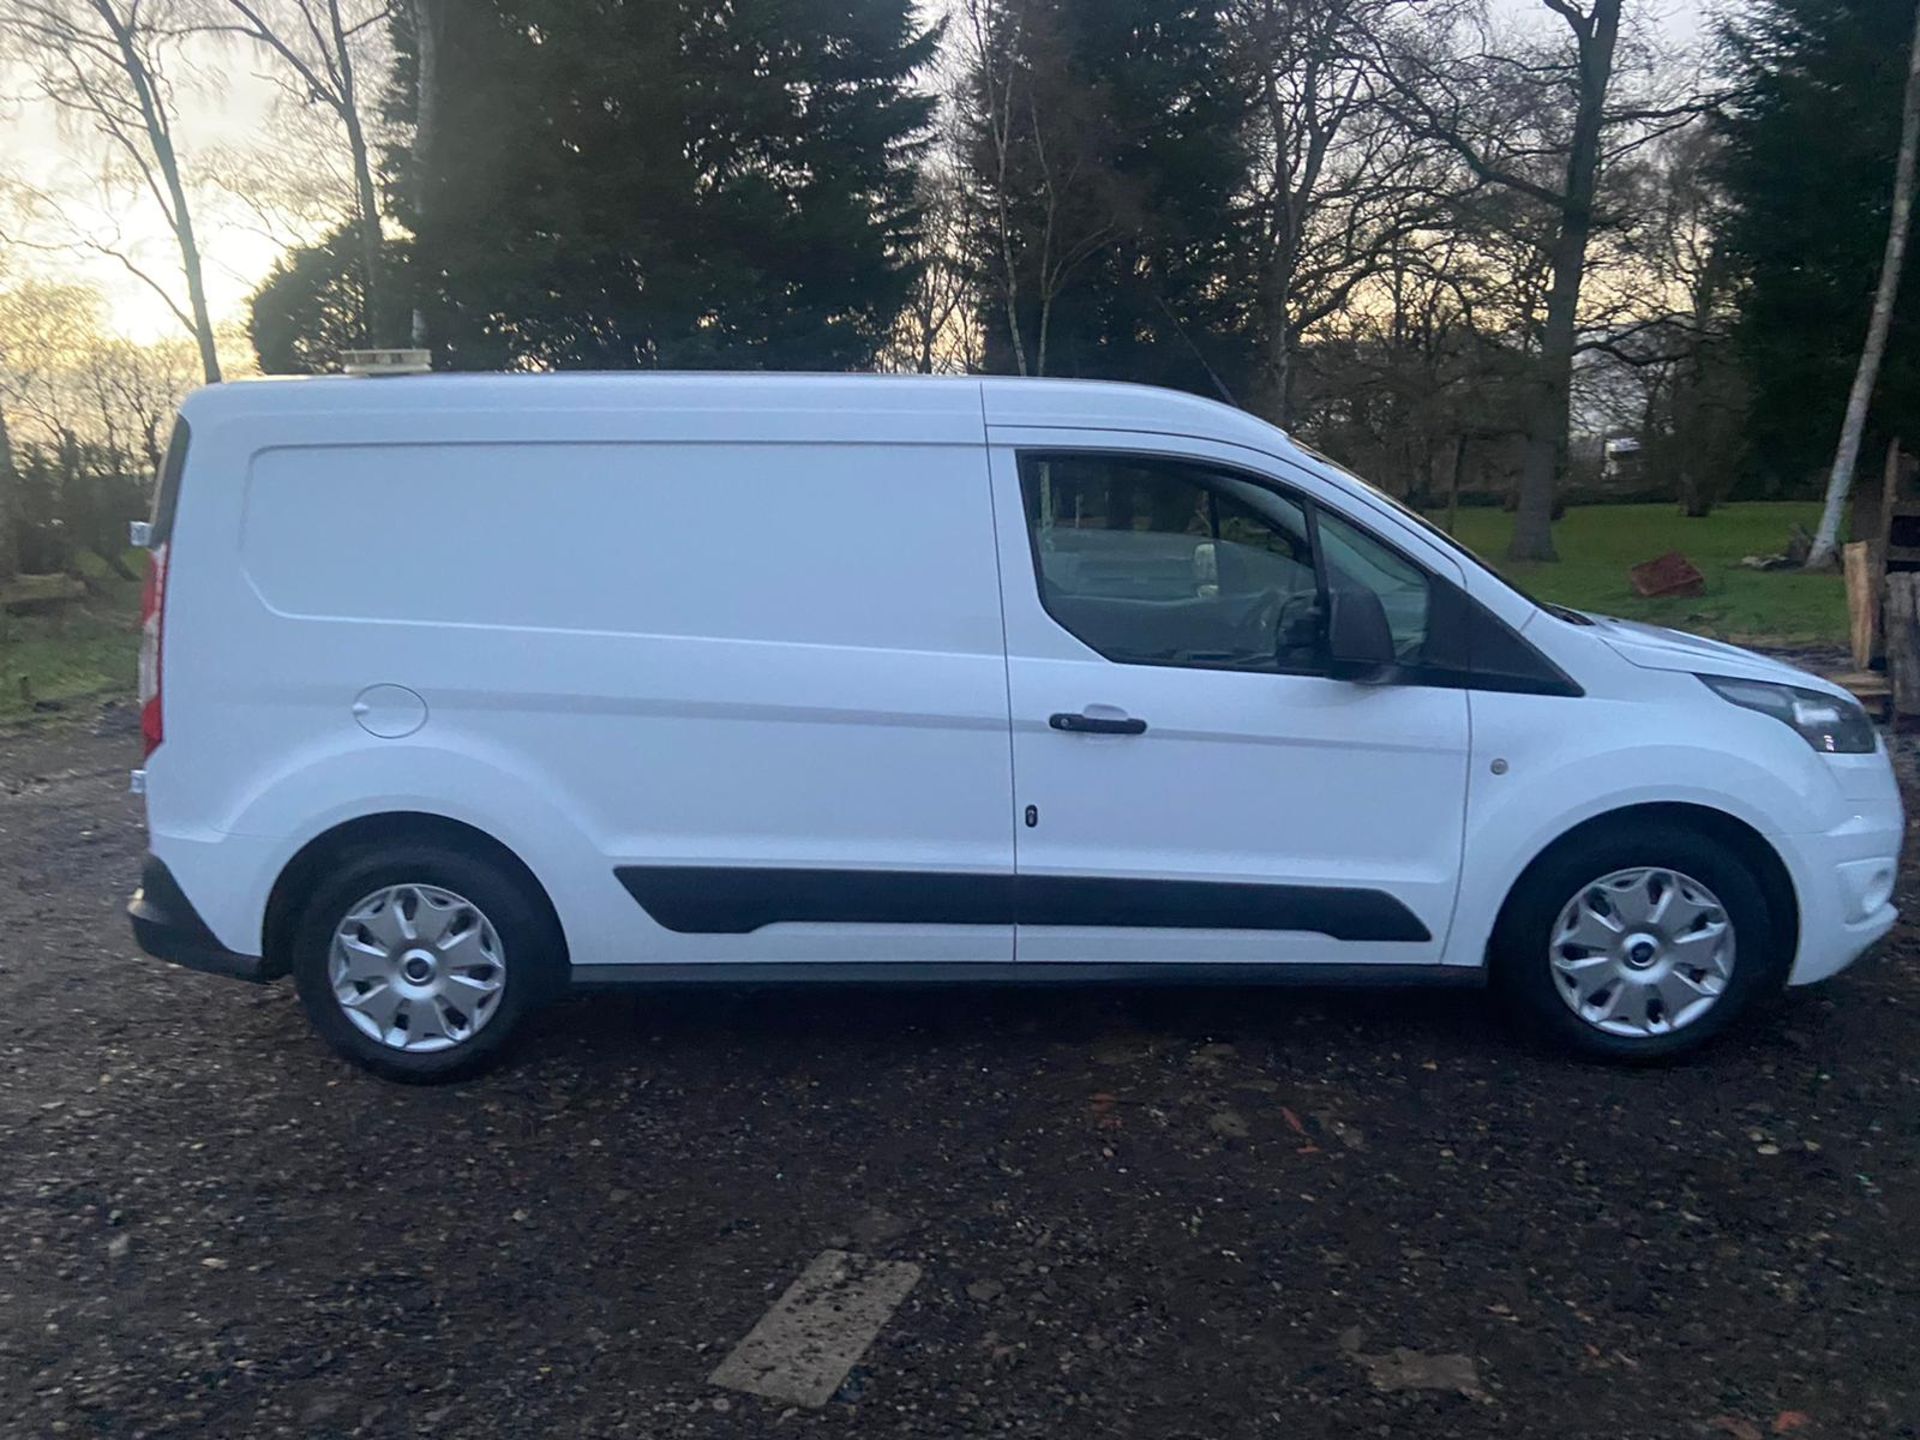 2015/15 REG FORD TRANSIT CONNECT 210 TREND 1.6 DIESEL WHITE PANEL VAN, SHOWING 1 FORMER KEEPER - Image 8 of 10